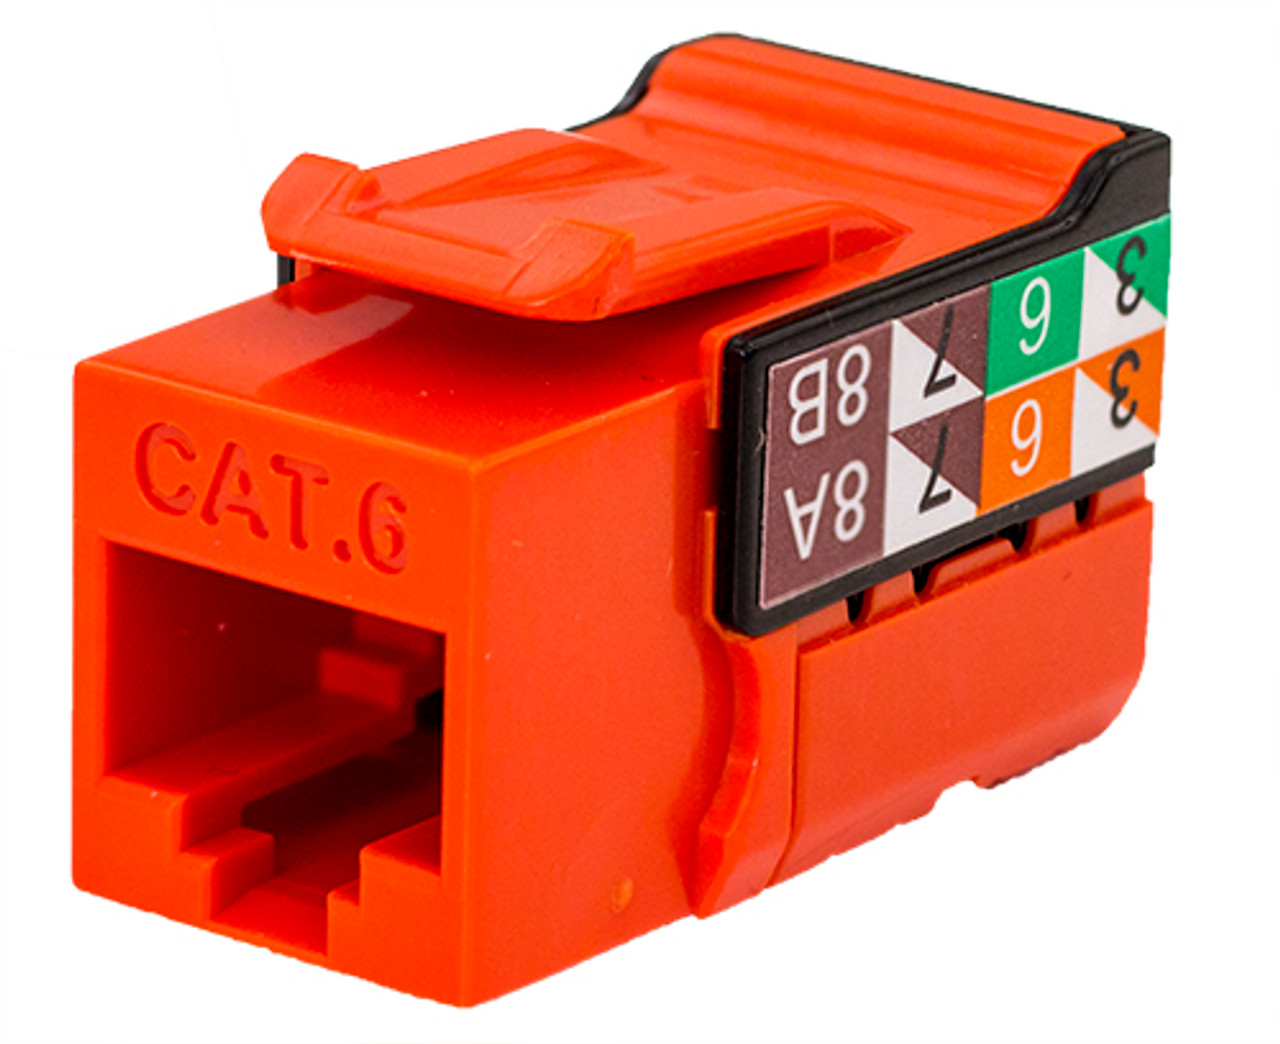 CAT6 Data Grade Keystone U-Jack, RJ45 90° 8×8. Save Time Terminate This Jack with our I-Punch Tool